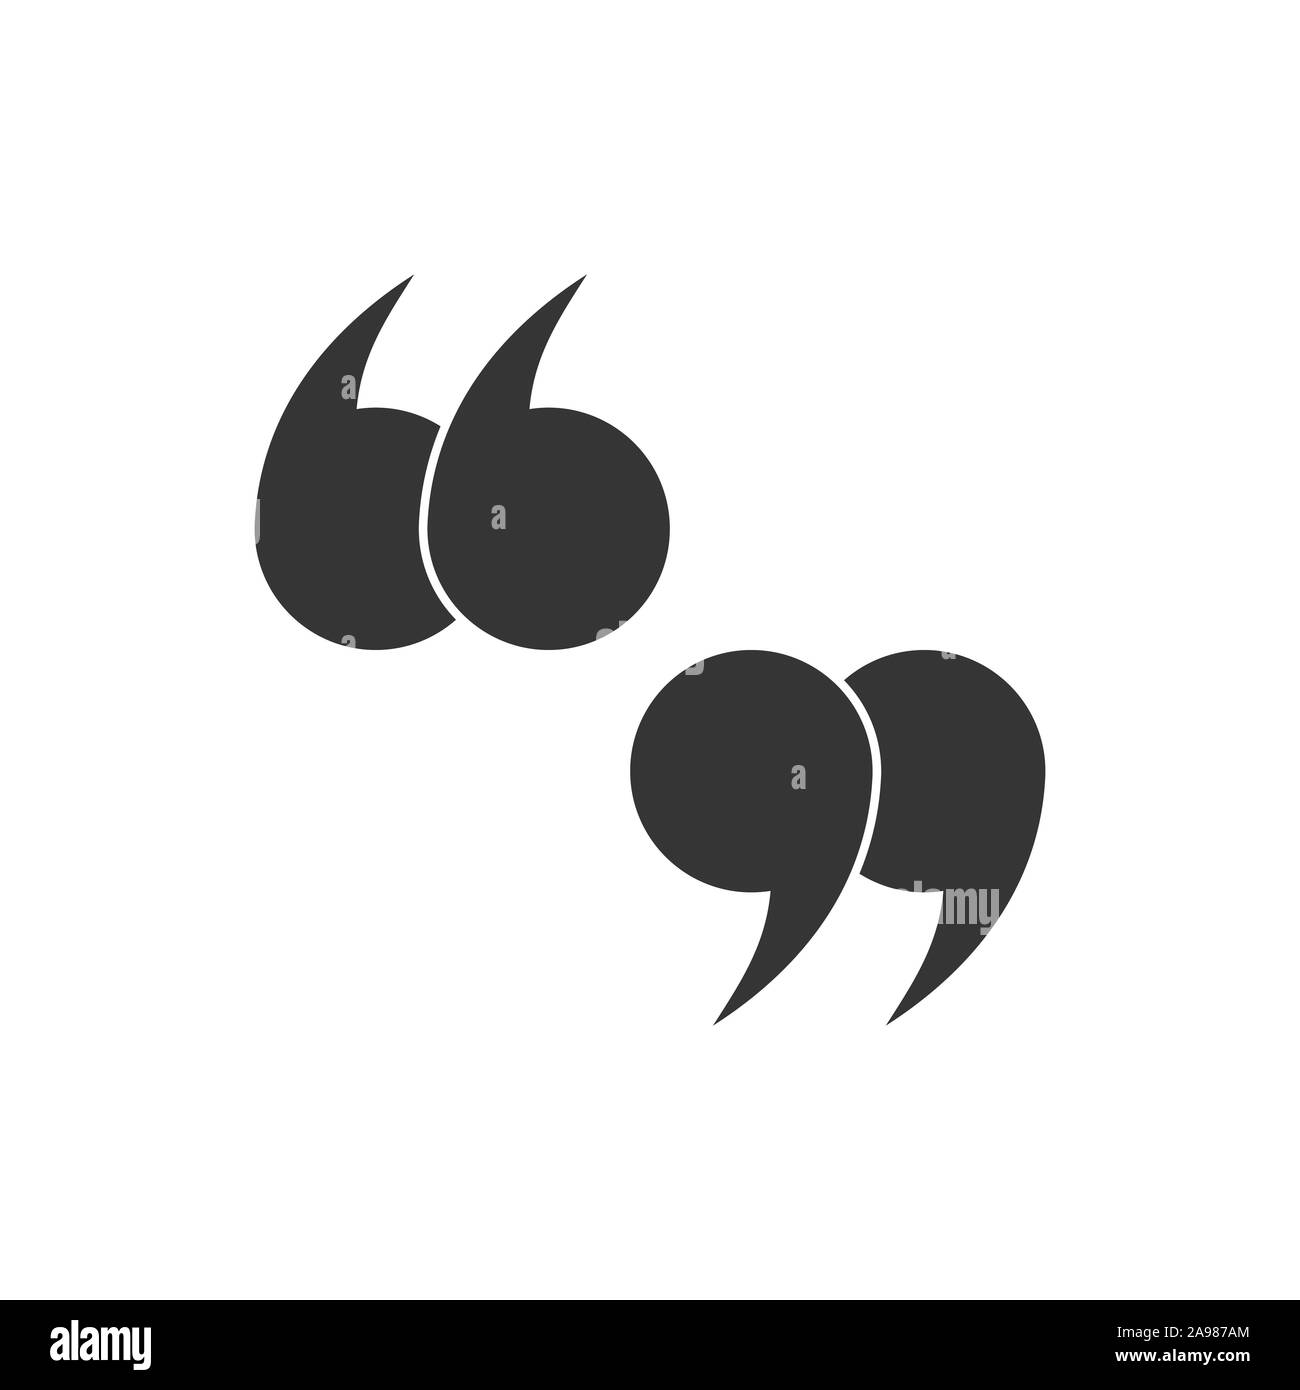 Double quotation mark Stock Vector Images - Alamy